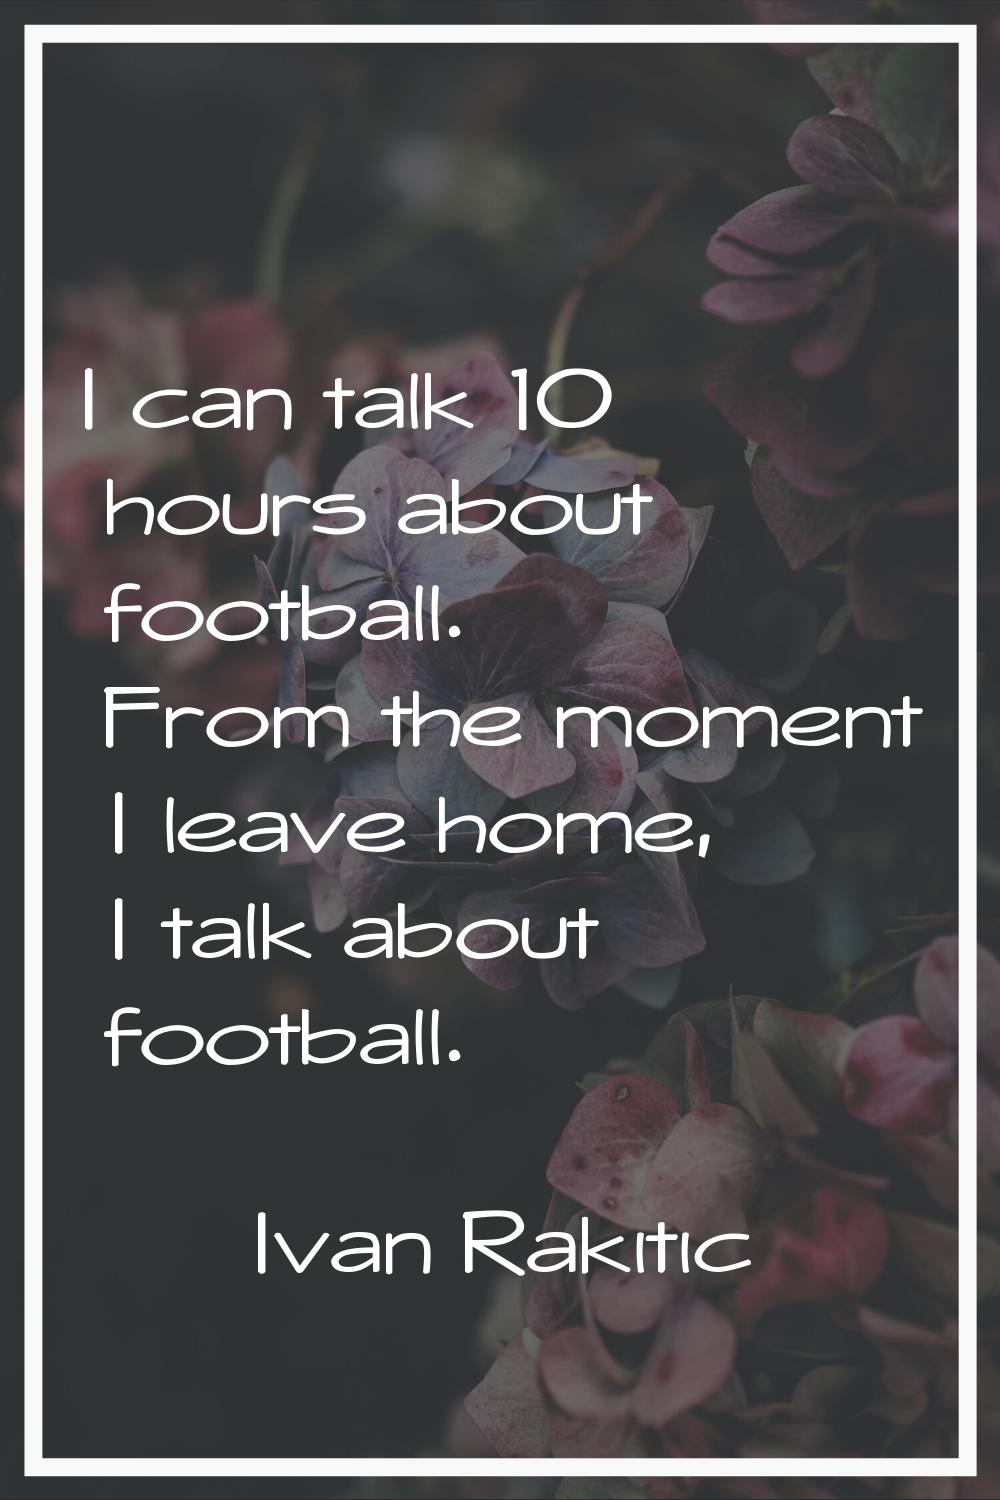 I can talk 10 hours about football. From the moment I leave home, I talk about football.